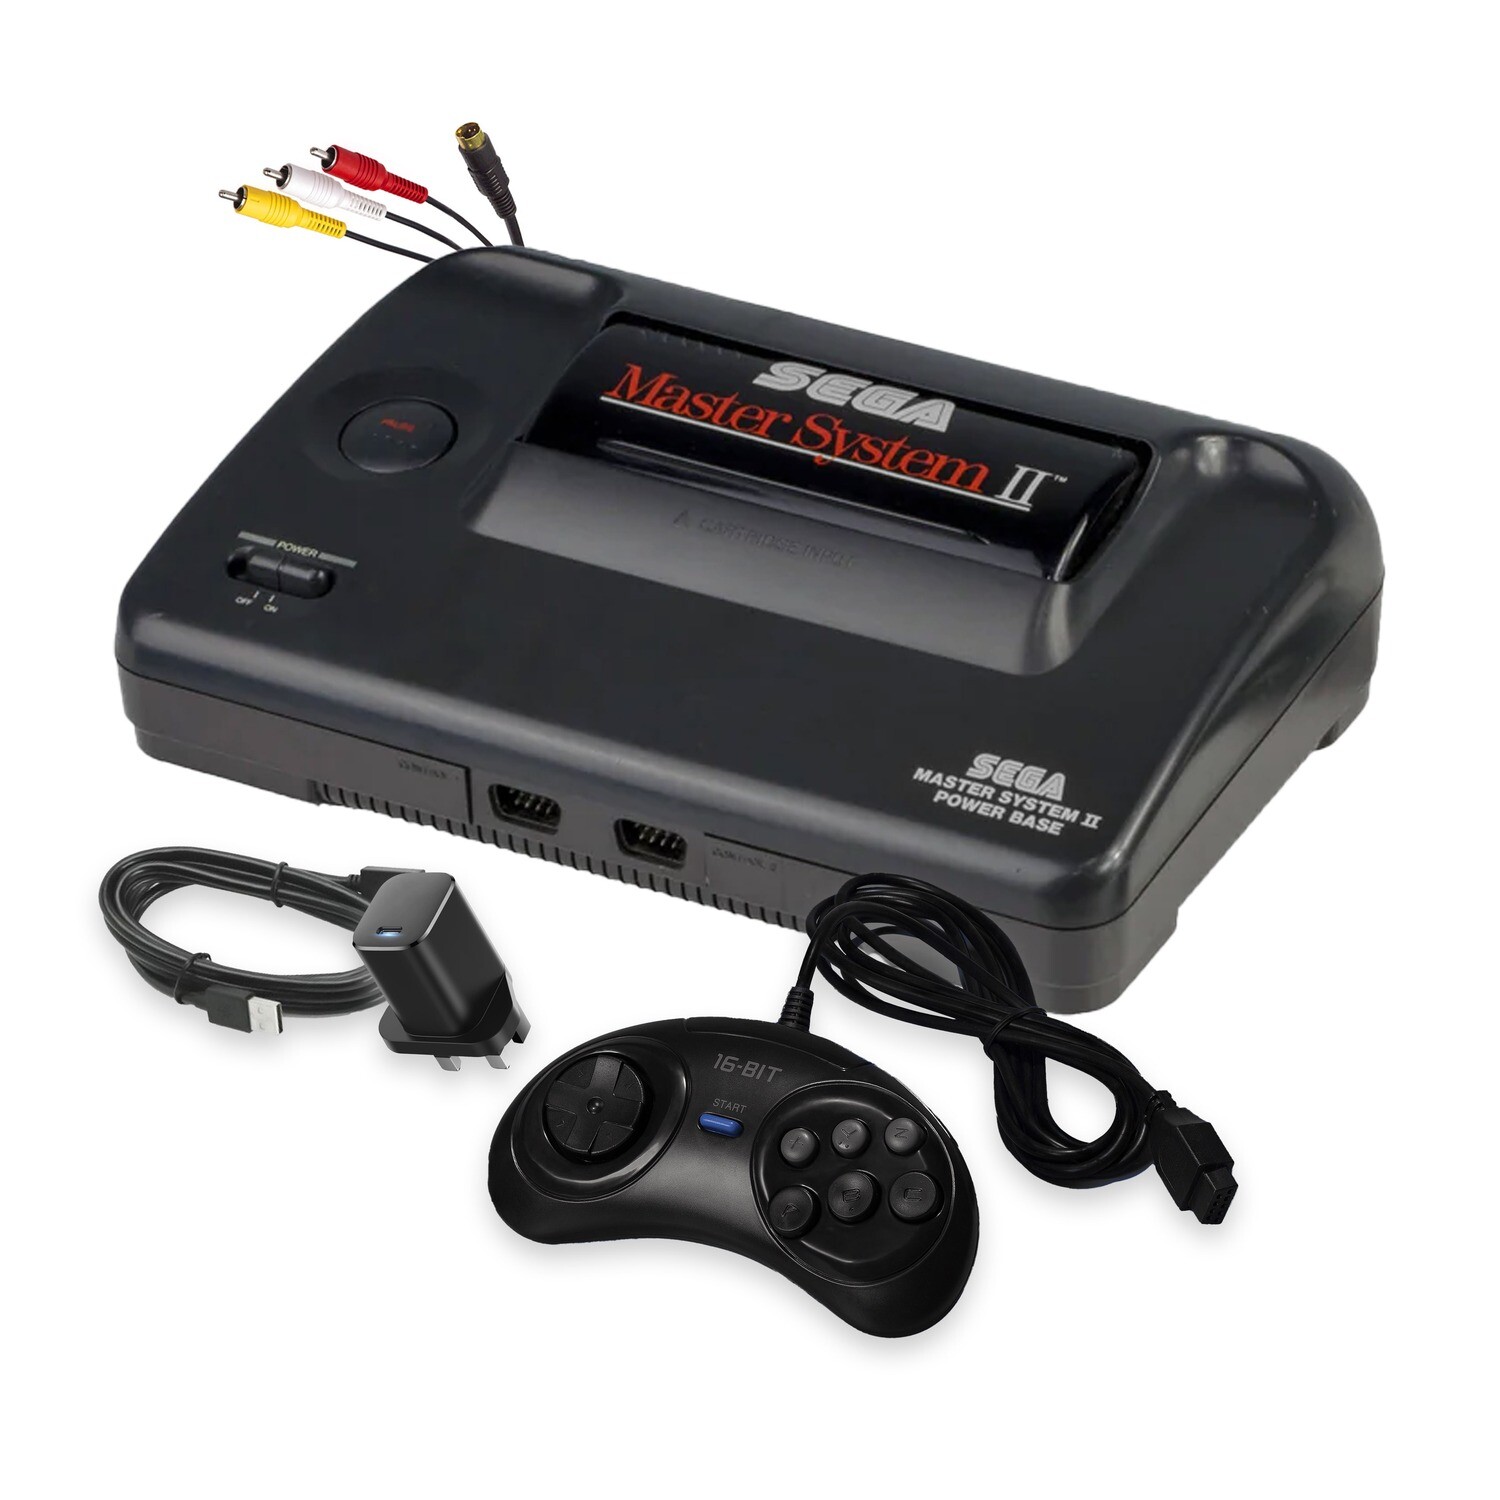 Master System II Console (Plus 1 Controller and Power Supply)